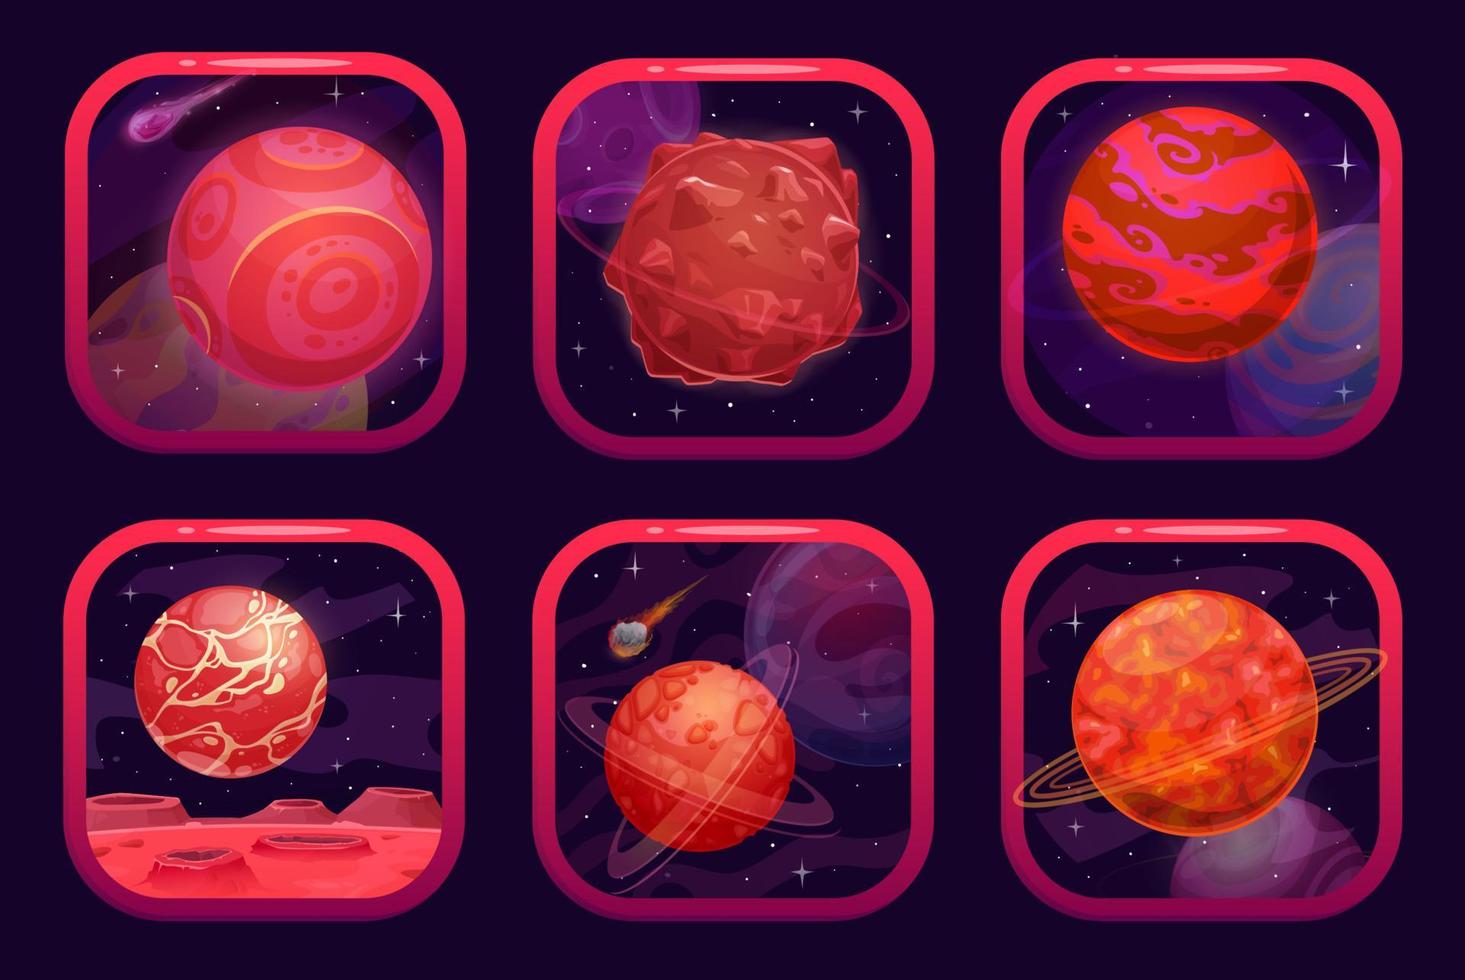 Space game app icons with galaxy red planets vector